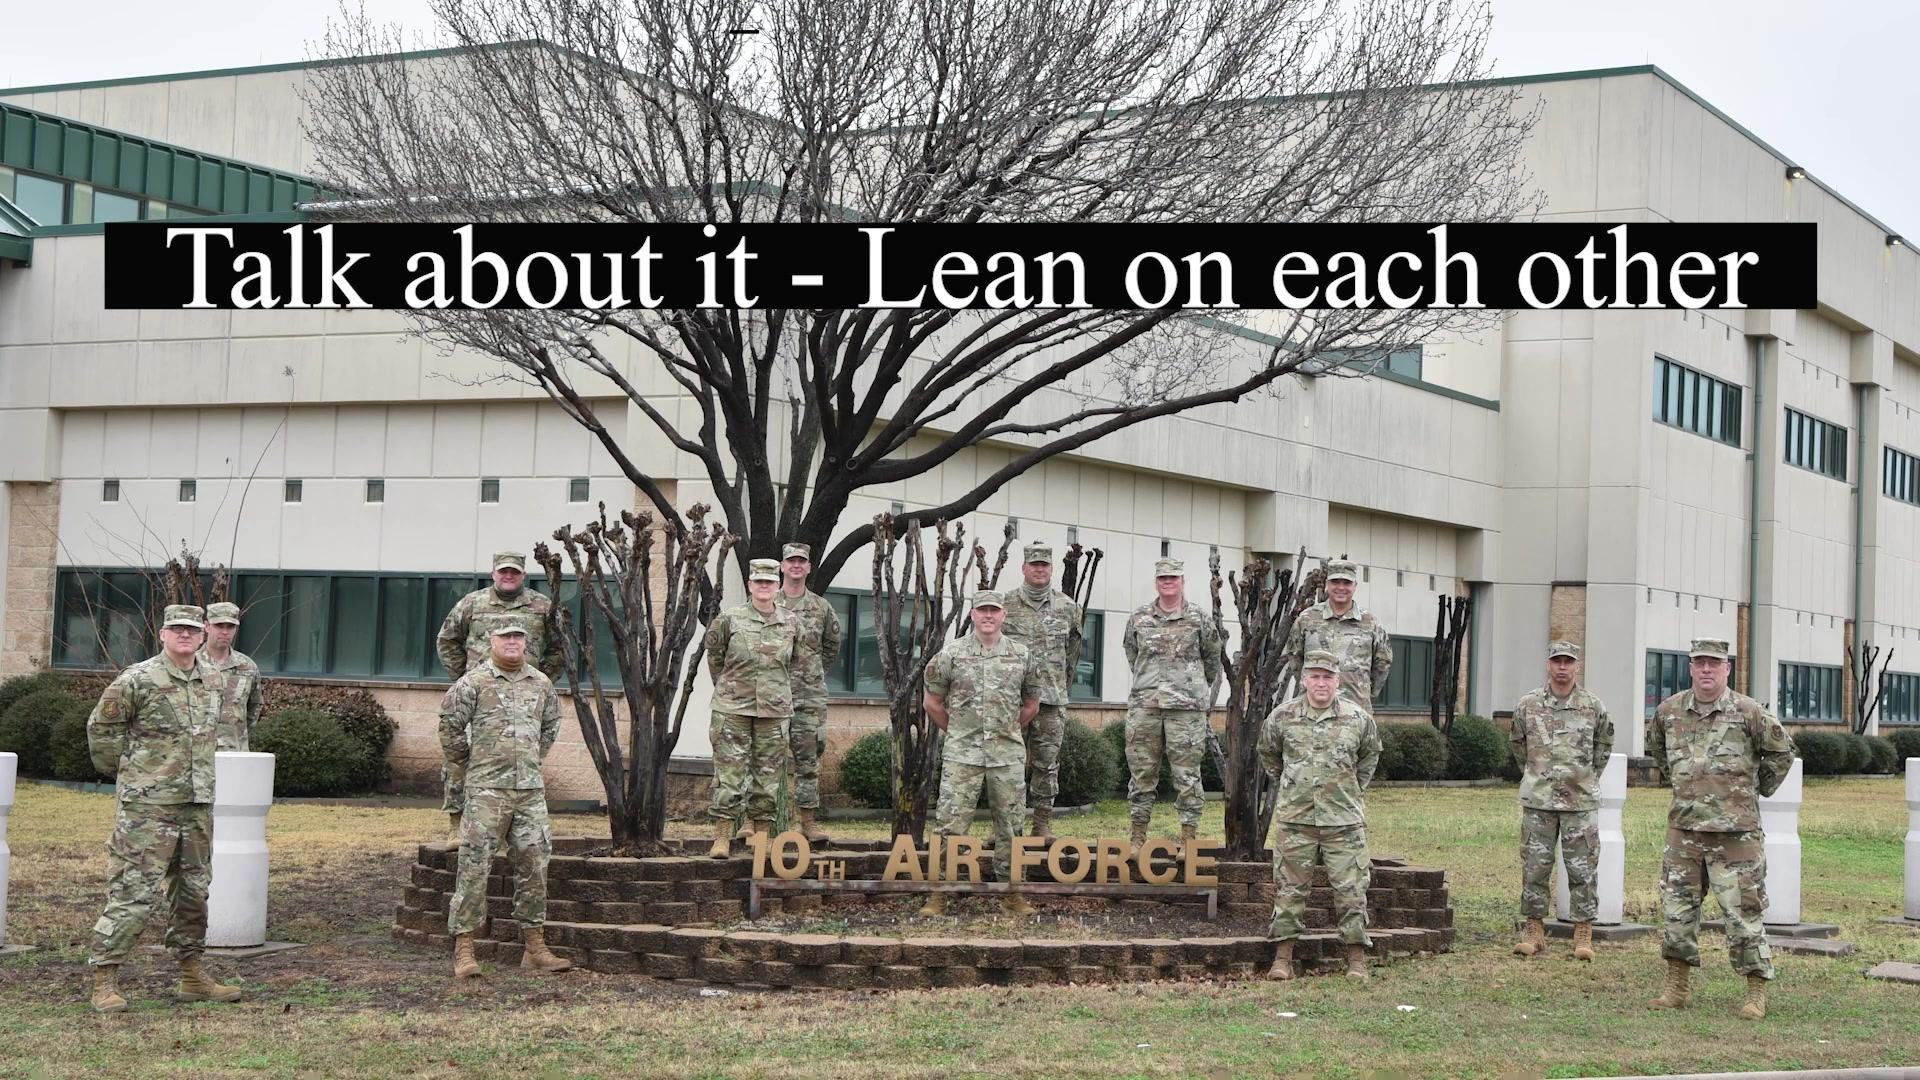 In the September Commentary, Chief Master Sgt. Jeremy Malcom, Tenth Air Force Command Chief discusses suicide prevention month, mental health and being a good teammate.